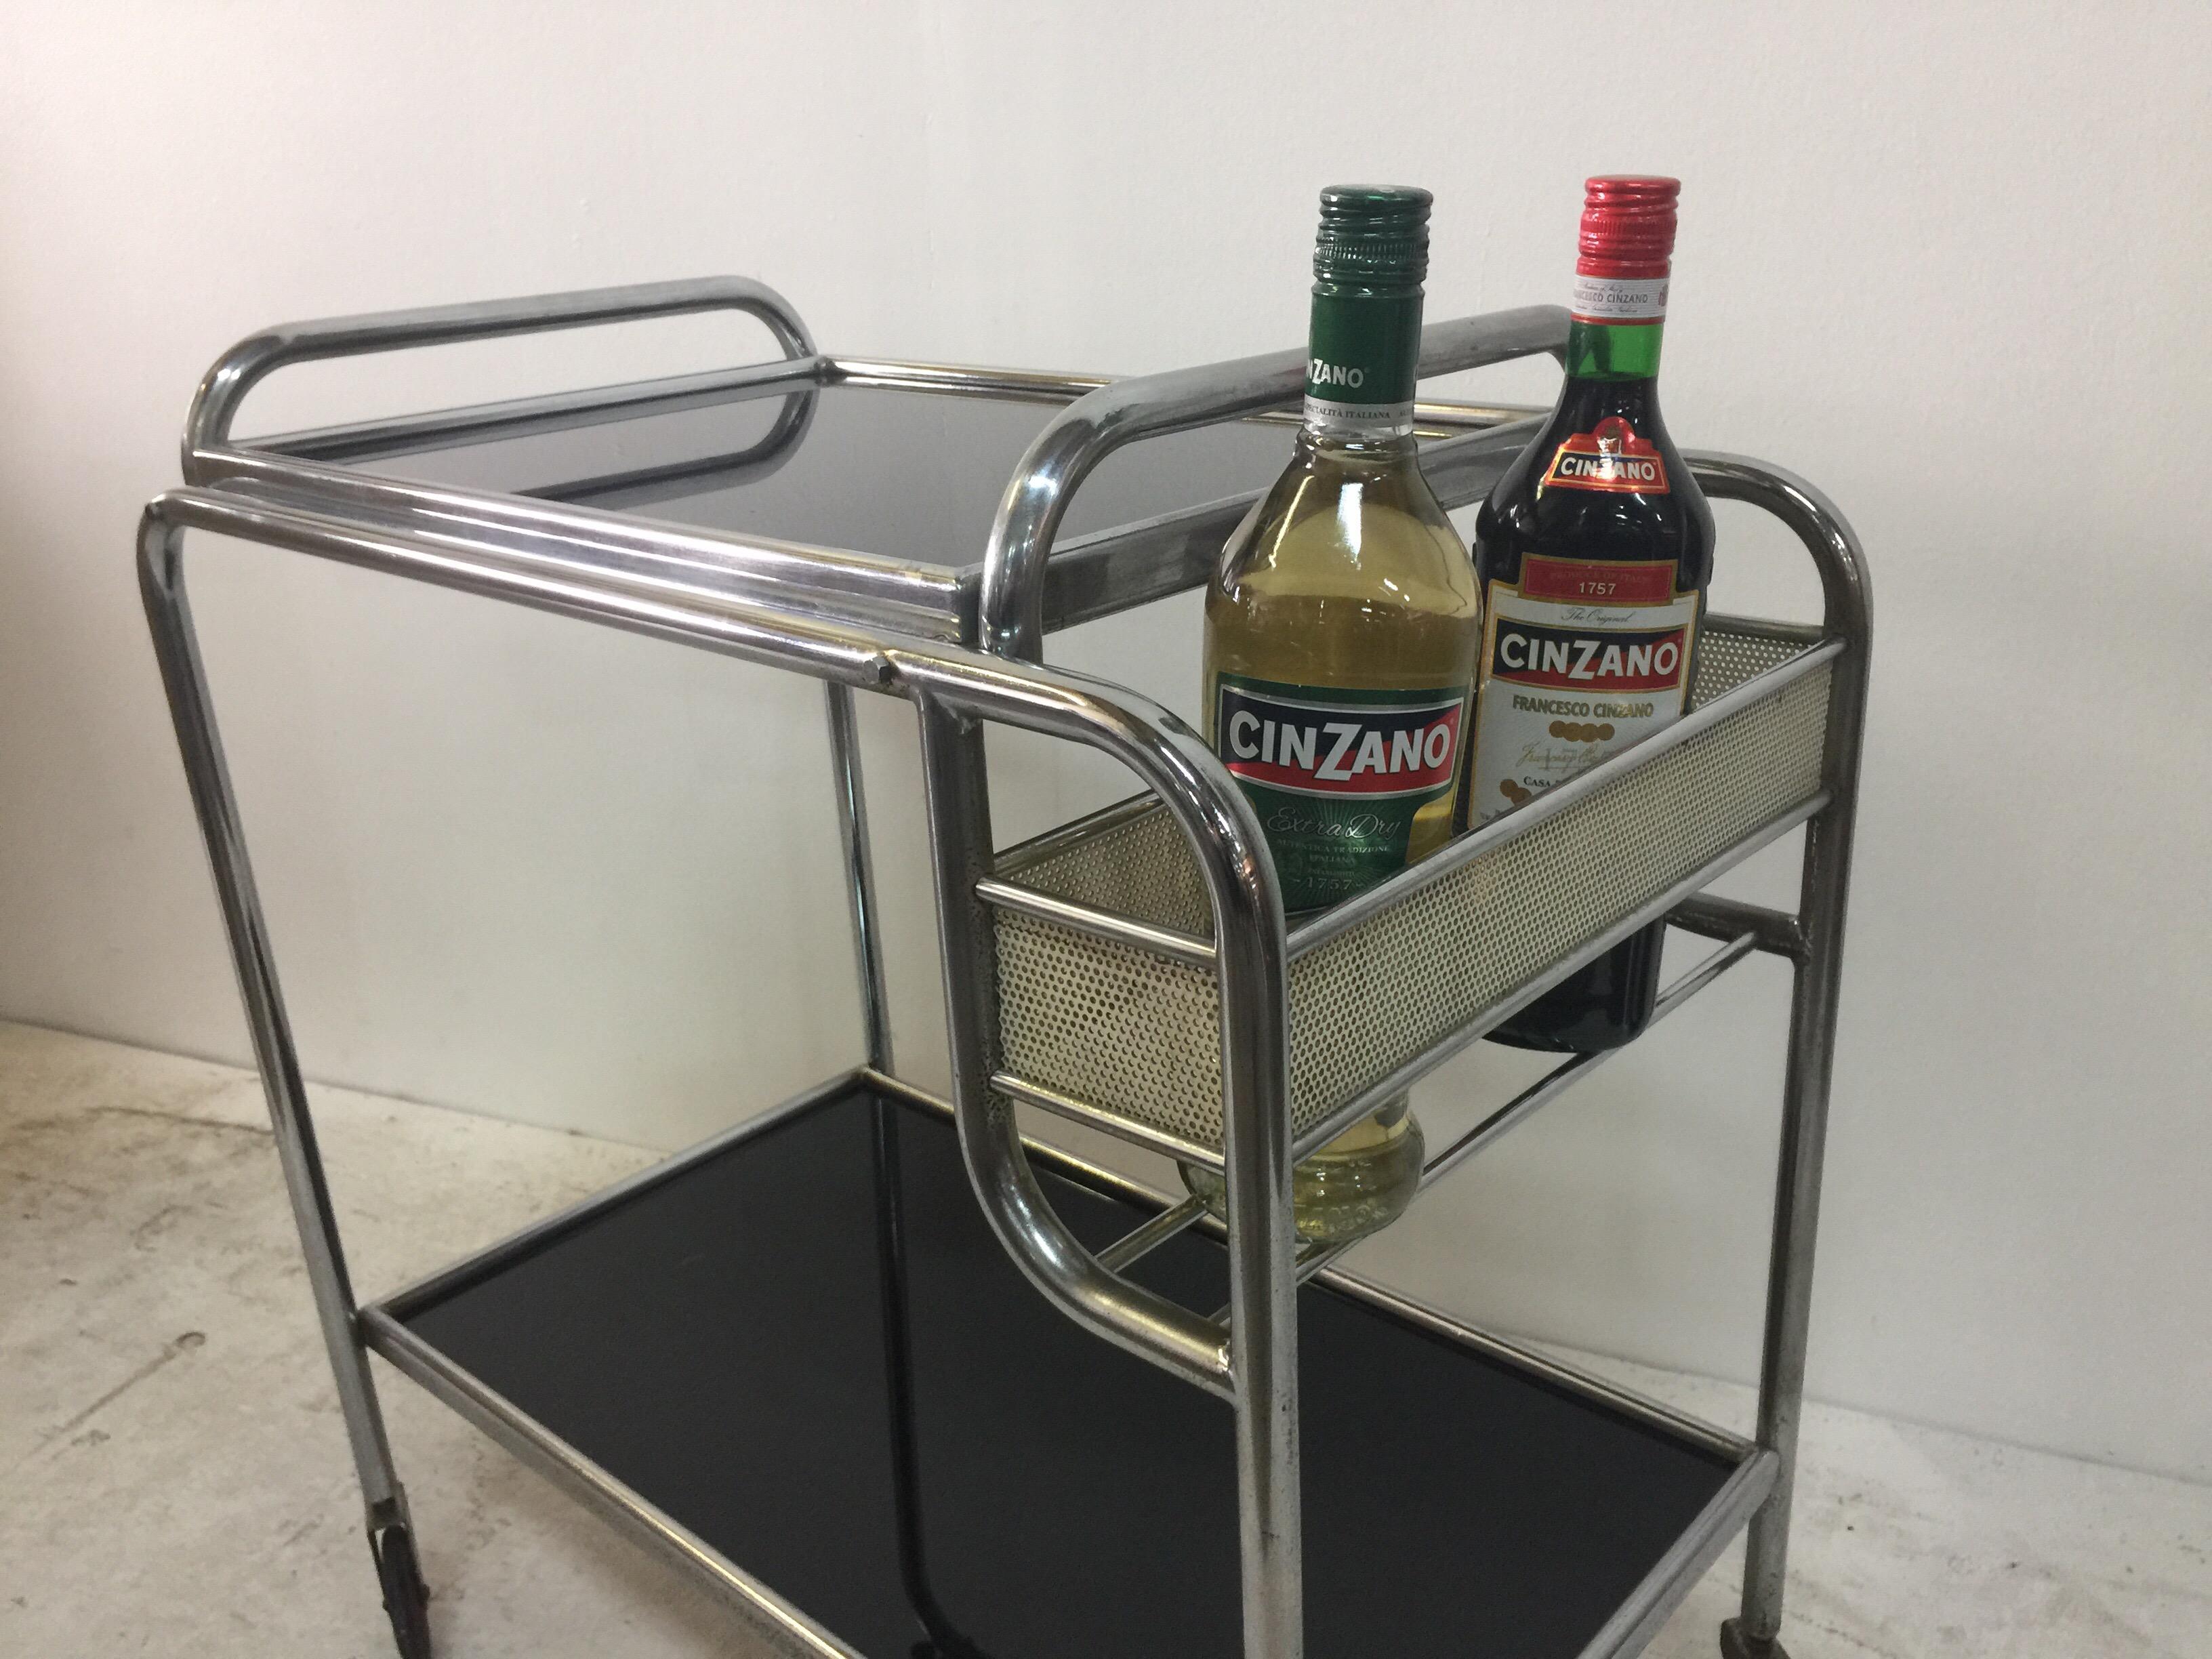 Chrome and glass bar trolley in the style of Matégot. Top tray with black glass is removable for service. Iconic Matégot perforated bottle caddy.